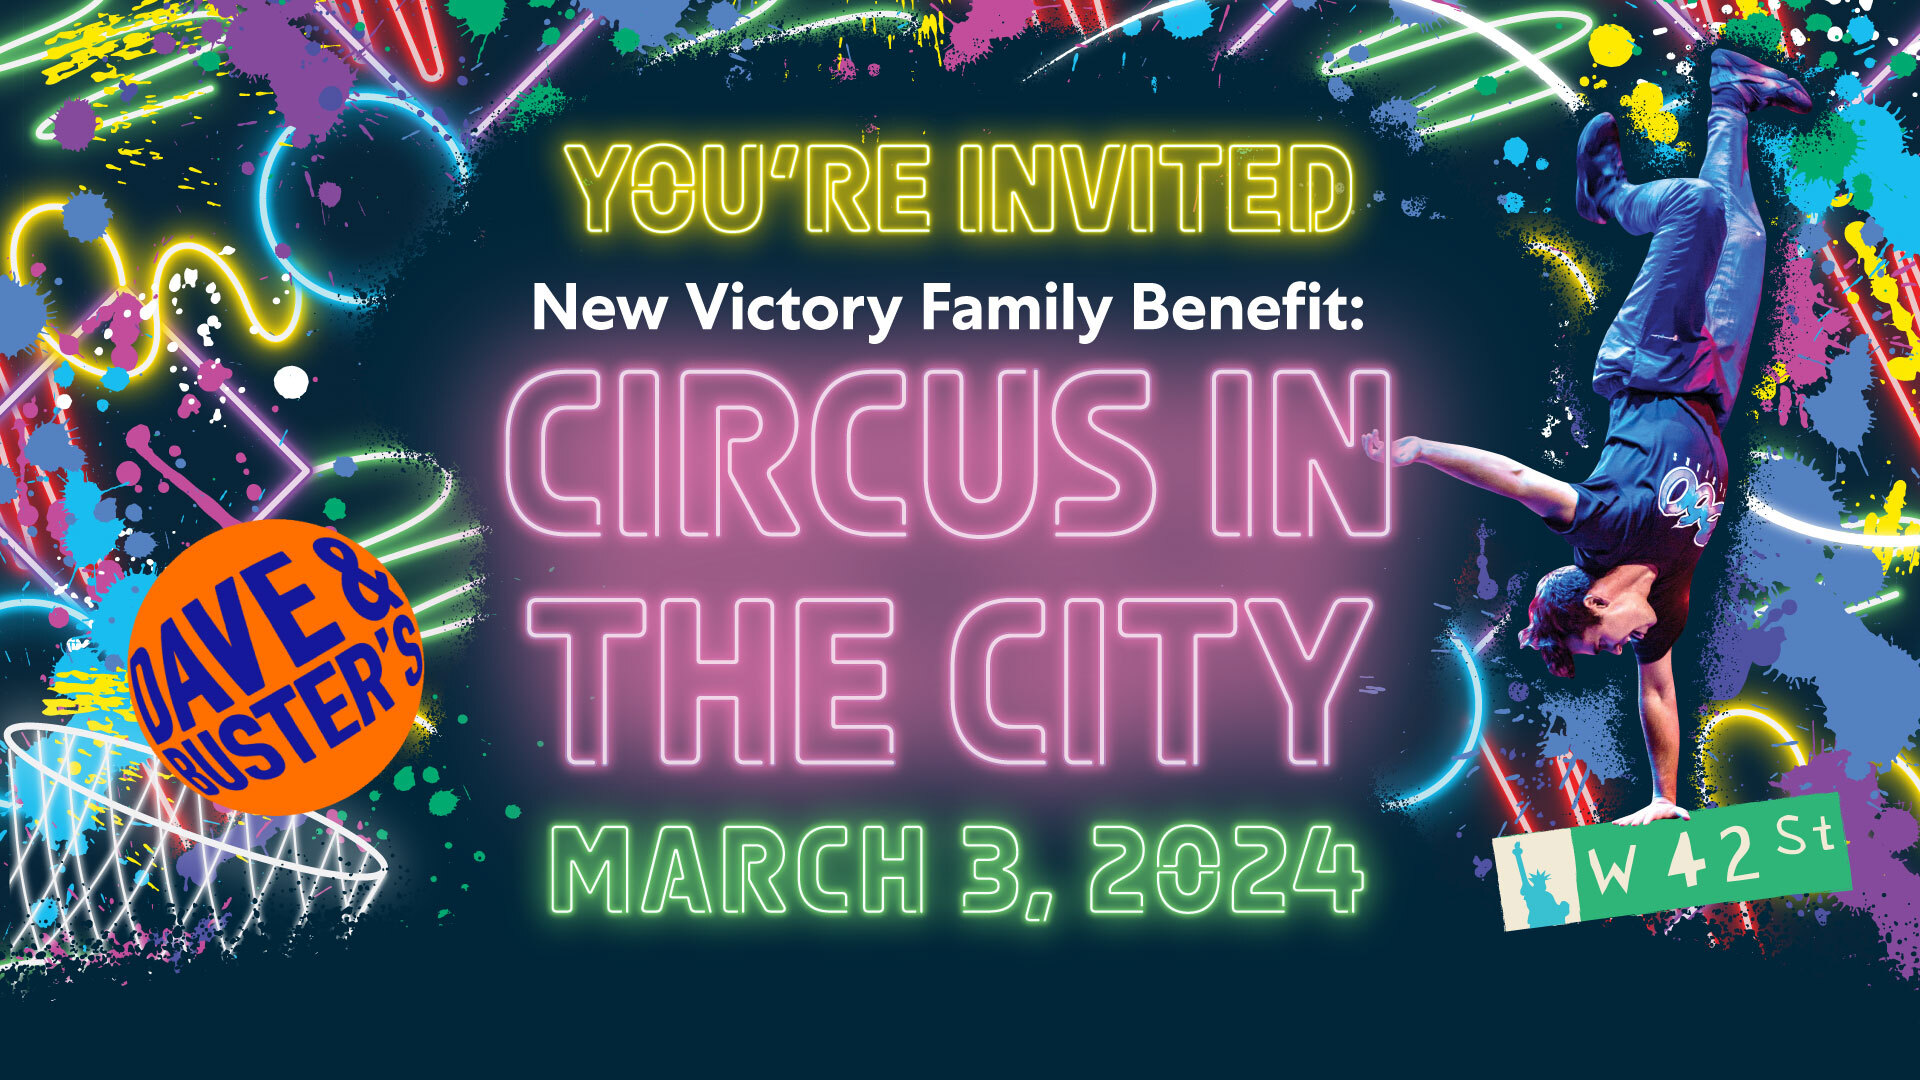 Glowing neon shapes, an illustrated basketball hoop and basketball that reads "Dave & Buster's," a break dancer and a W 42nd Street sign surrounding the text "You're Invited! New Victory Family Benefit: CIRCUS IN THE CITY on March 3, 2024"